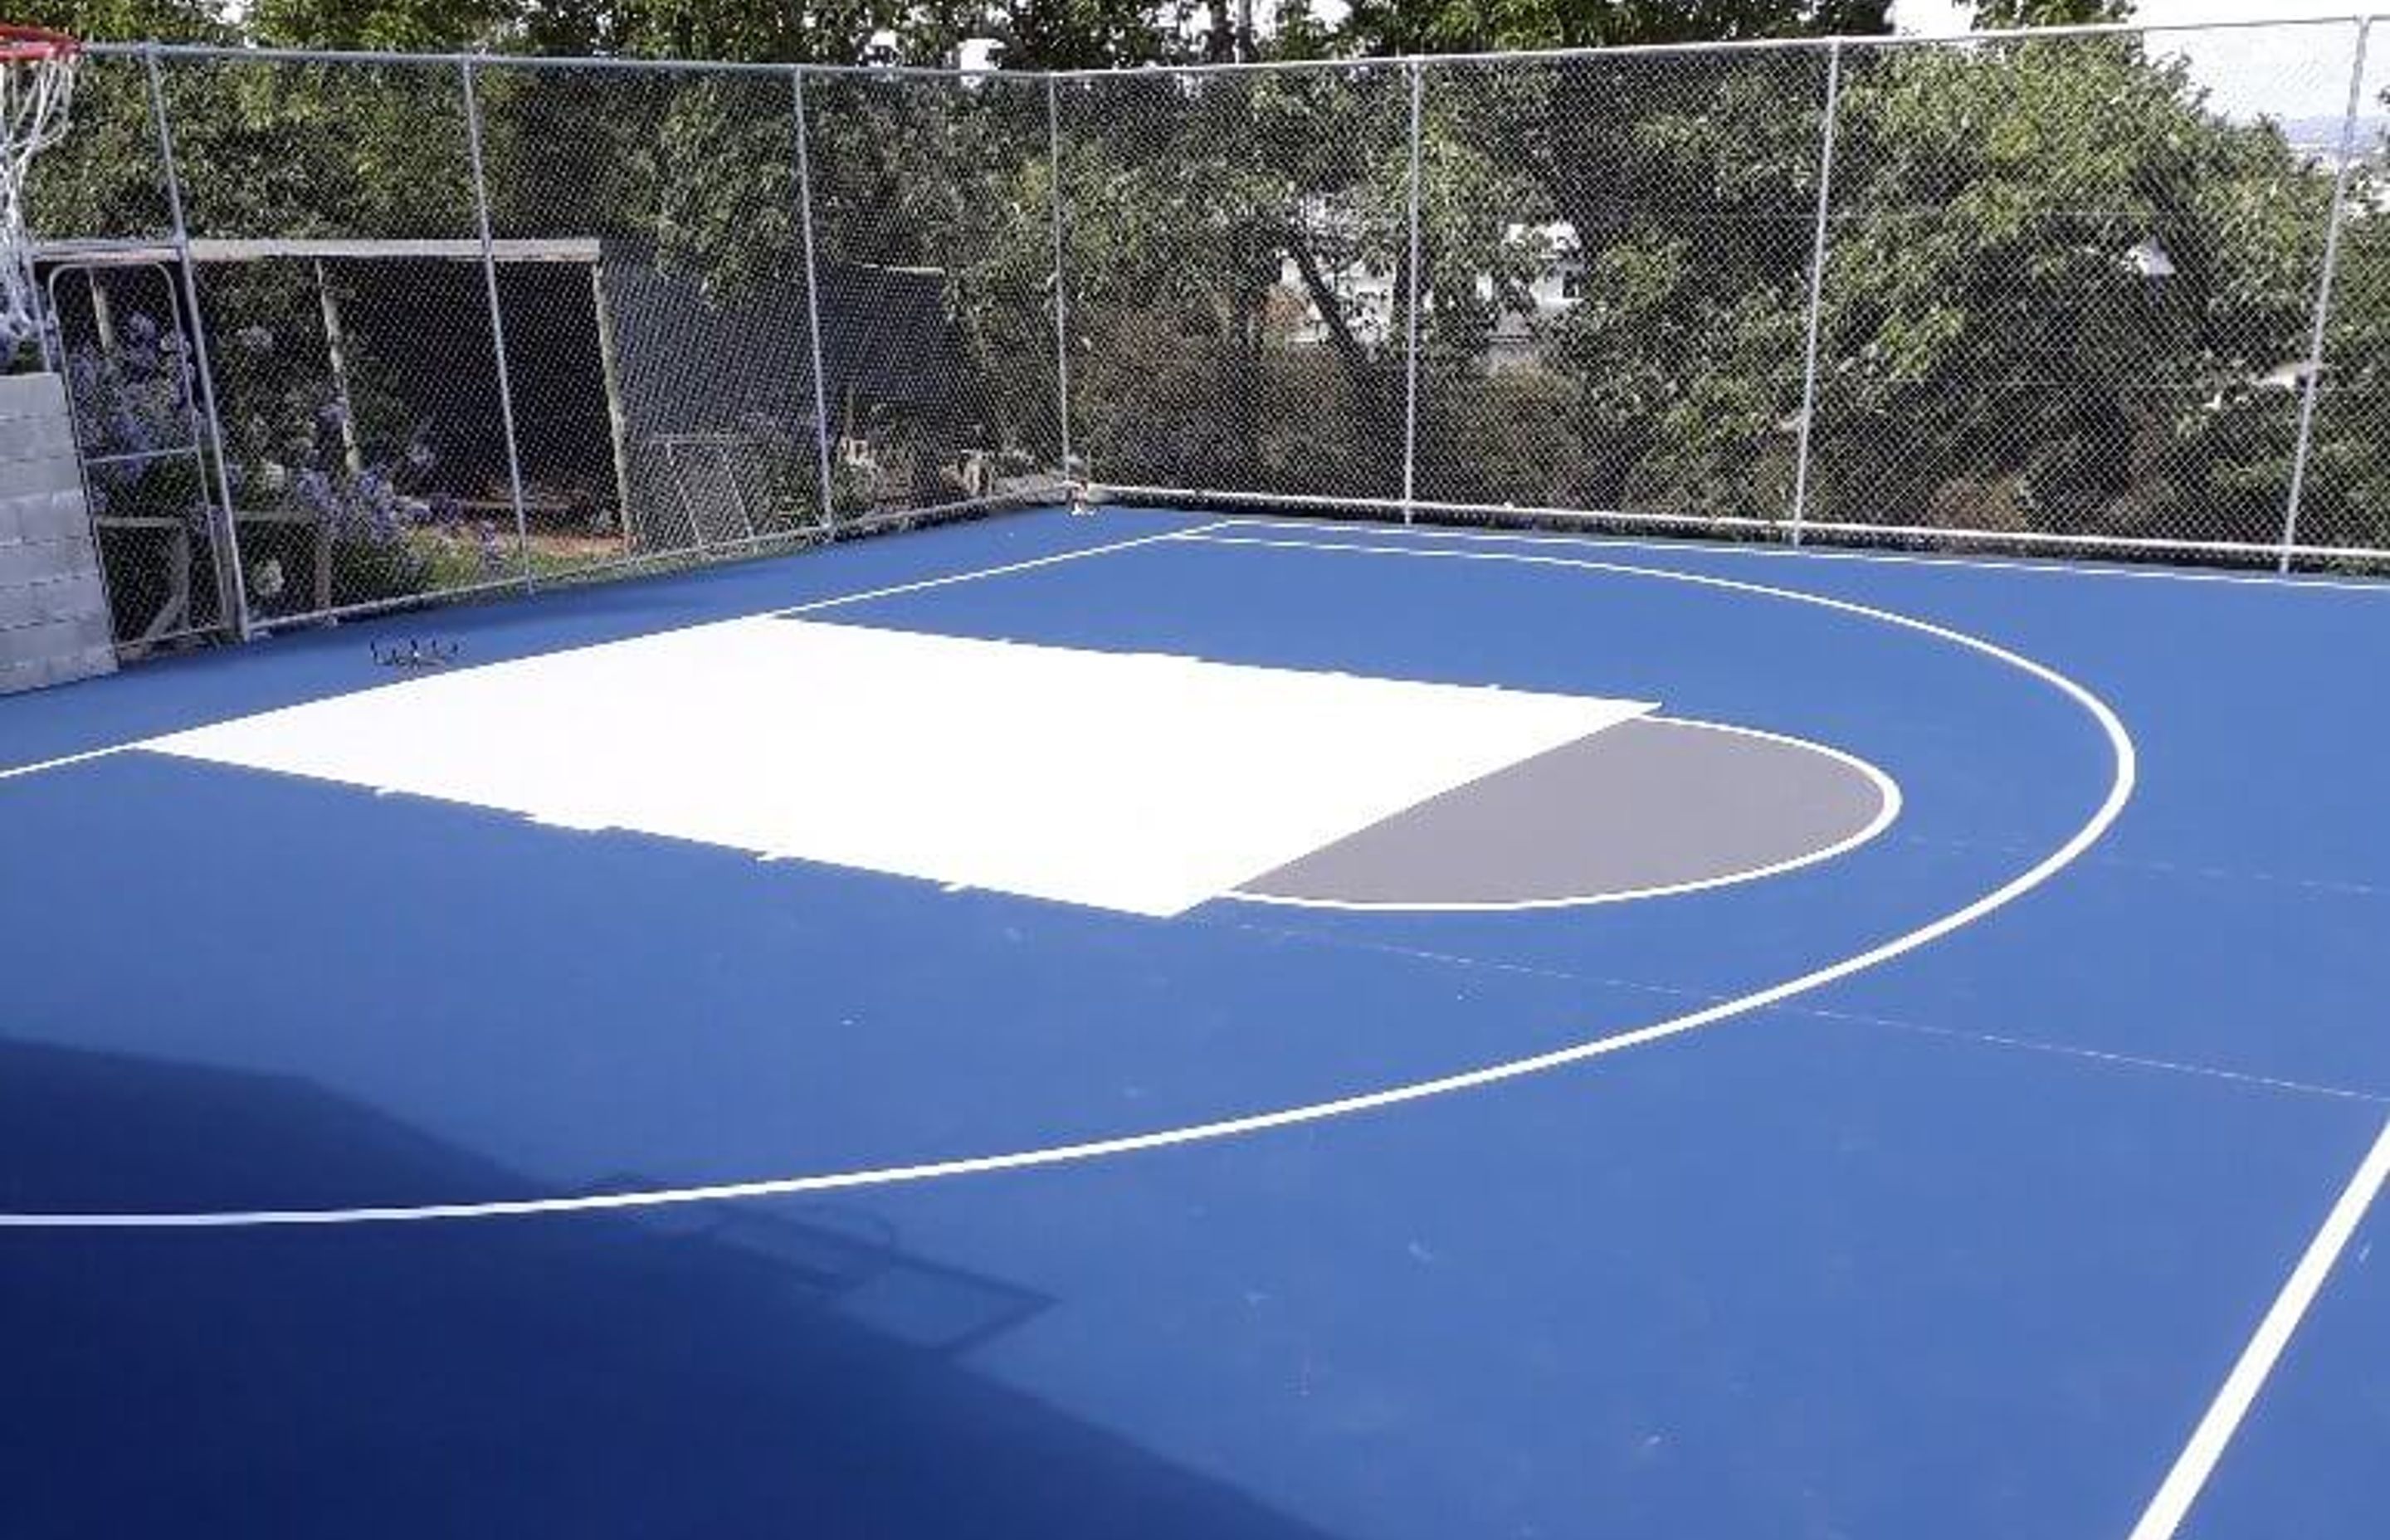 Backyard Basketball is better on a synthetic surface